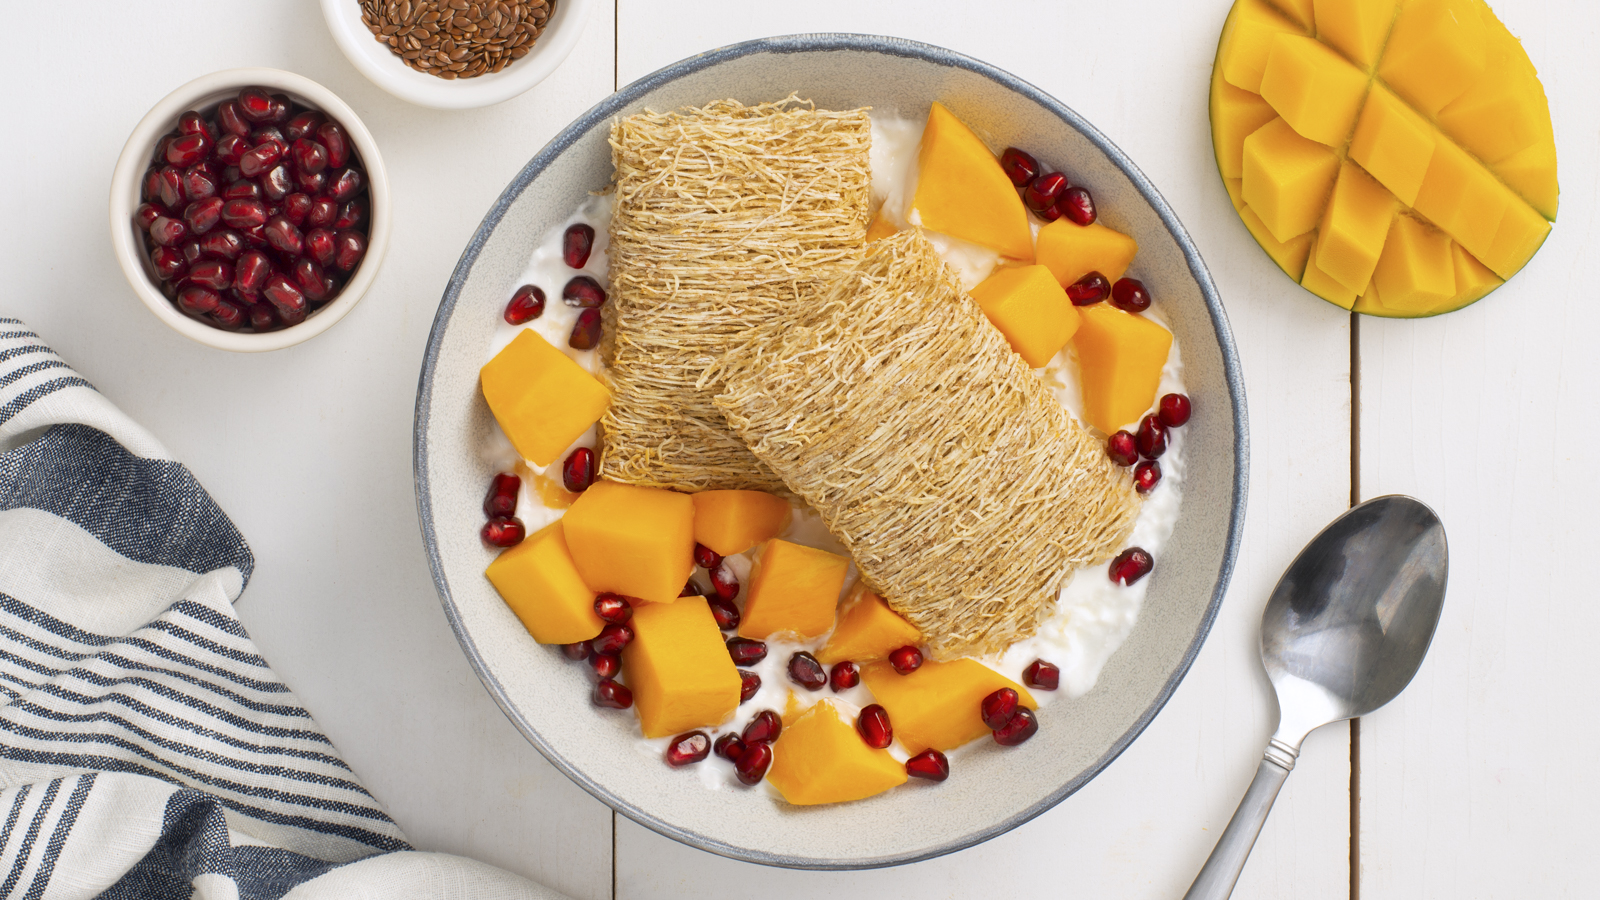 Two Shredded Wheat biscuits in a white bowl with mango pieces and pomegranate pieces.